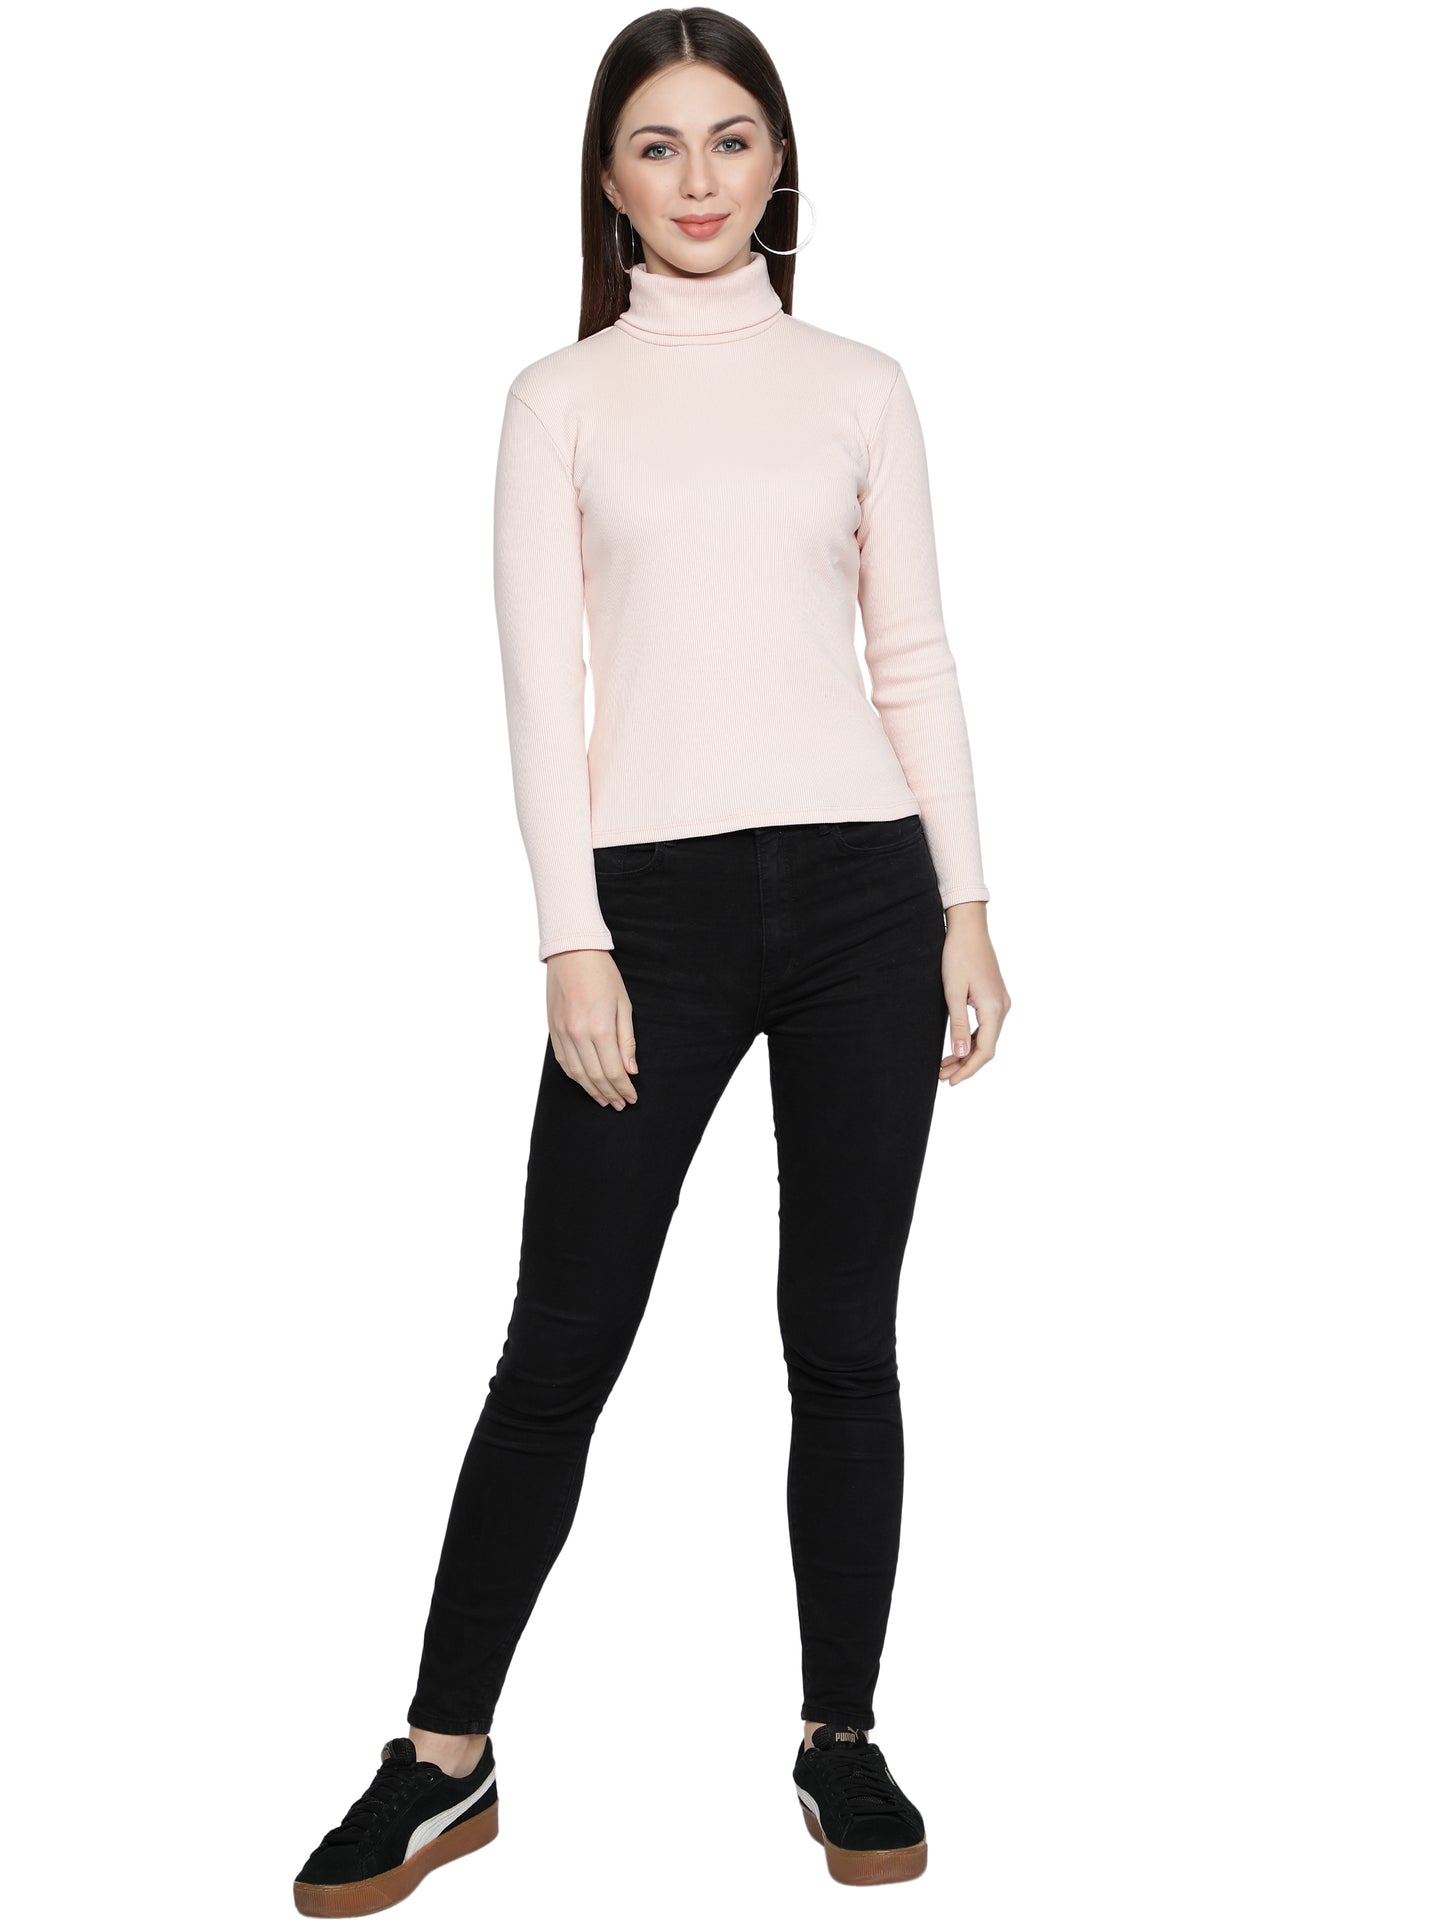 Women Roll-Up Ribbed Solid Light Pink High Neck Tops Turtle Neck Top for Women